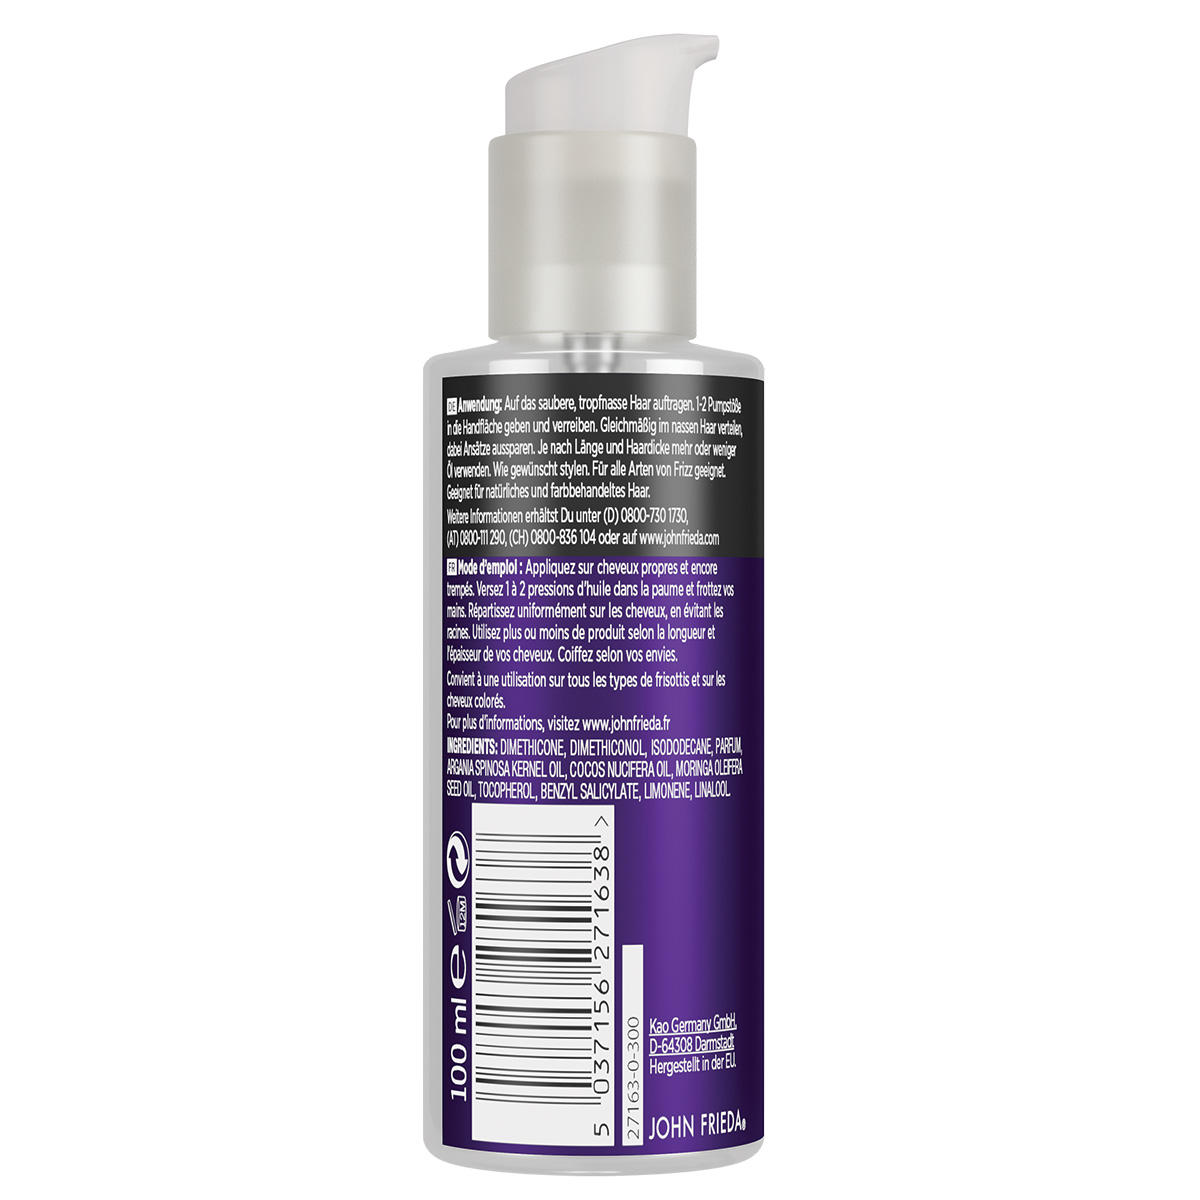 JOHN FRIEDA Frizz Ease Réparation Miracle Huile Tropicale 100 ml - 2